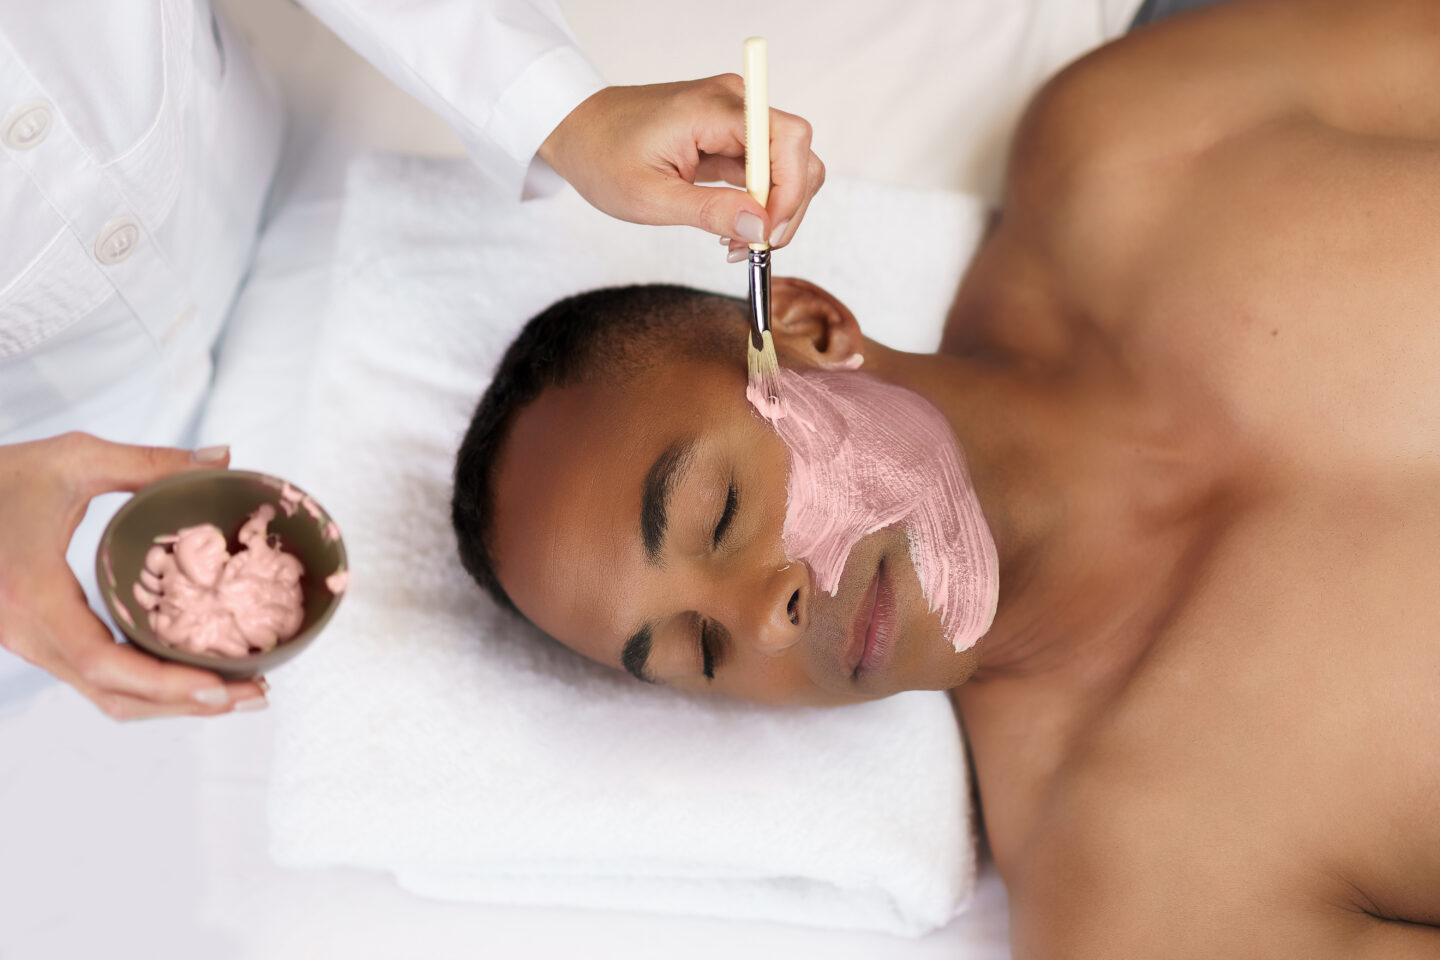 A black man lying on a table has a pink facial treatment applied to his face with a brush.